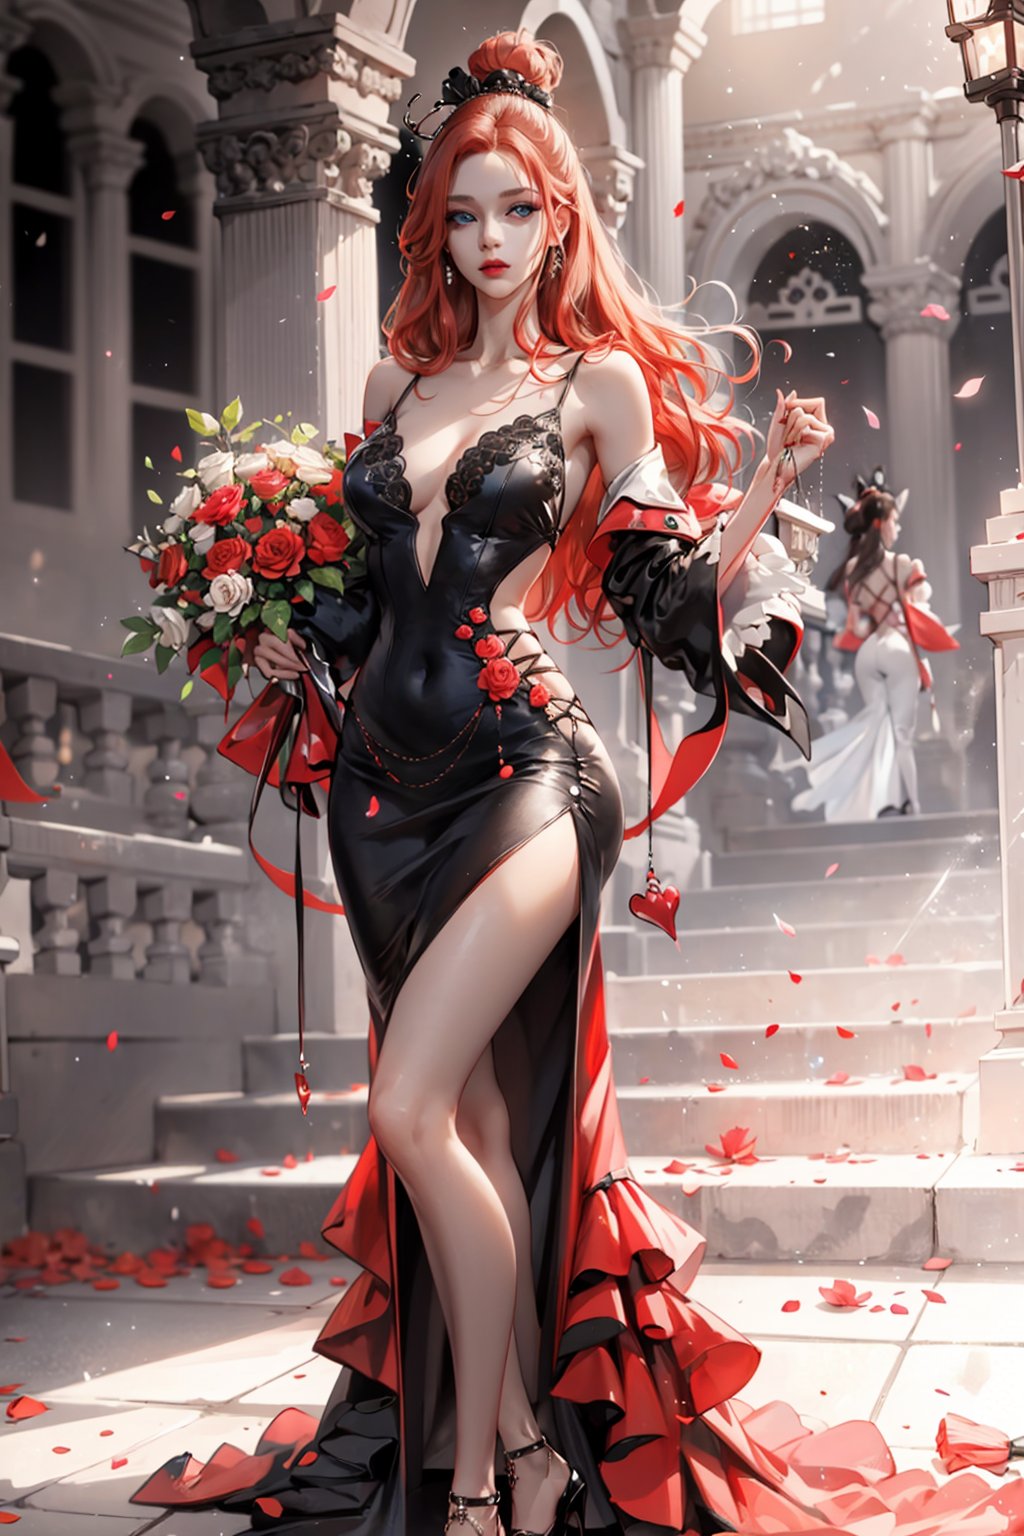 (asterpiece:1.2, best quality), (Soft light), (shiny skin),  ginger_hair, long_hair, hateful look,long dress, party, ballroom, ballgown, eye_lashes, collarbone, victorian, blue eyes, red_long_ hair_girl, crowed, ball party, red and black dress, dancing, standing, holding campaigne, flowers petals,weiboZH,hll